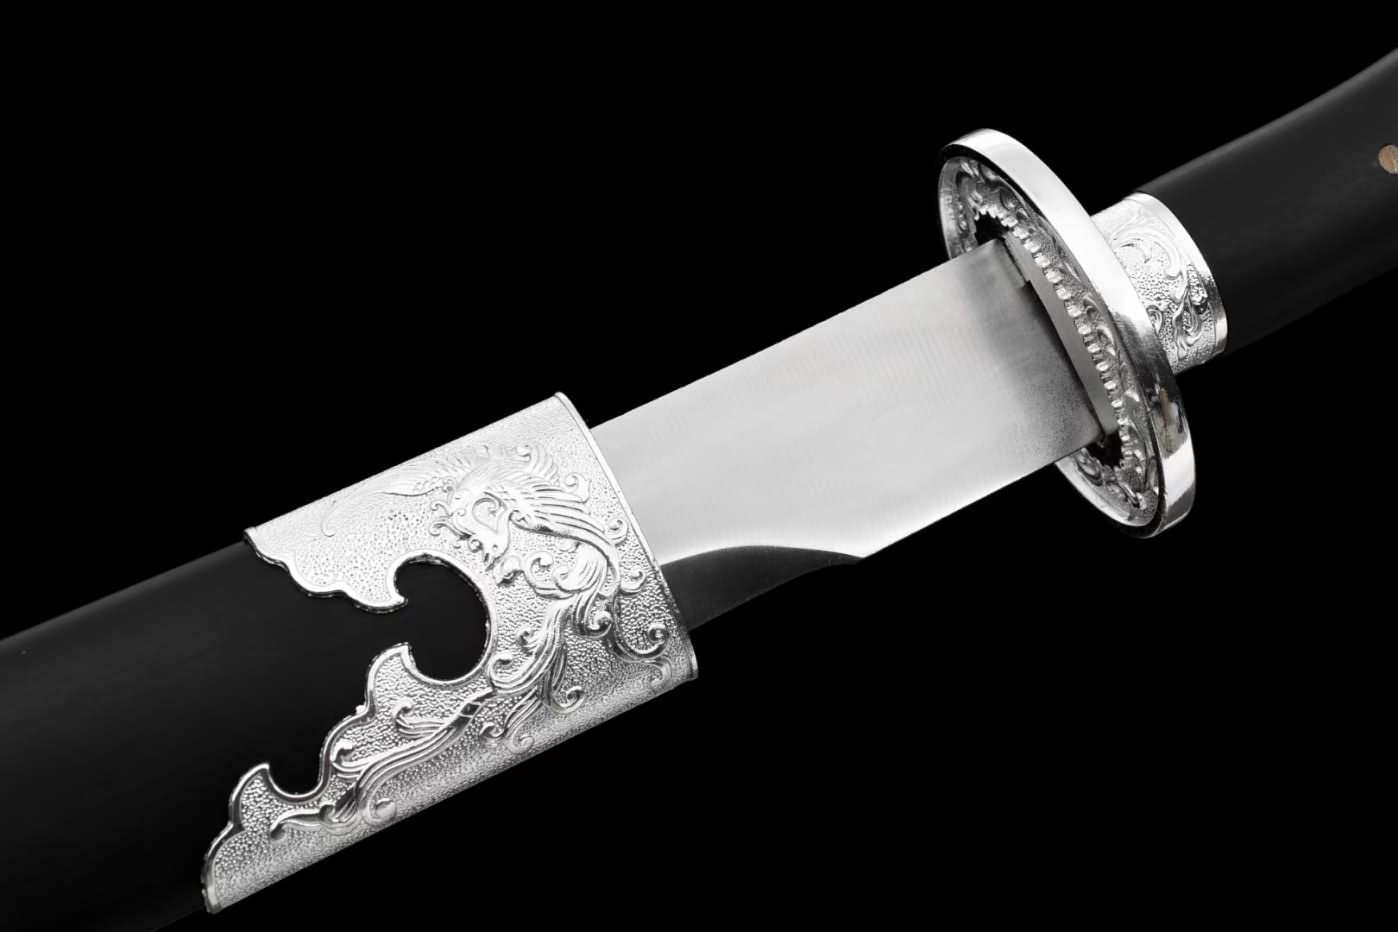 Dao Broadsword,Forged Damascus Steel Blades,Alloy Fittings,Black Wood Scabbard,chinese sword